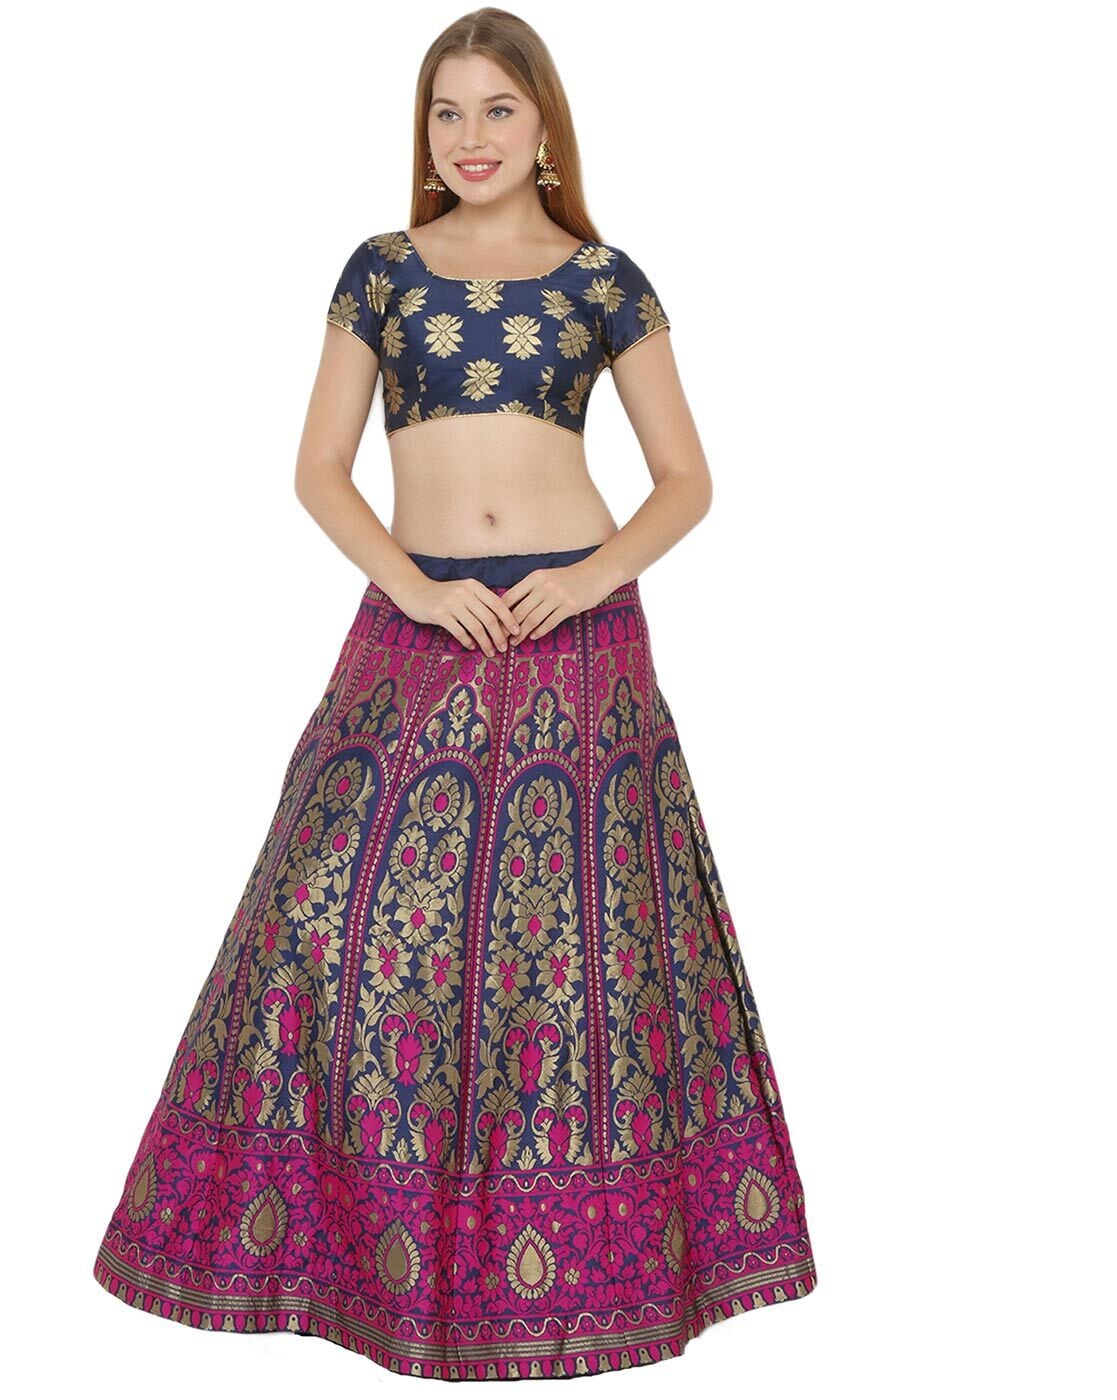 Under 1000 Rs Party Dress – Tagged 